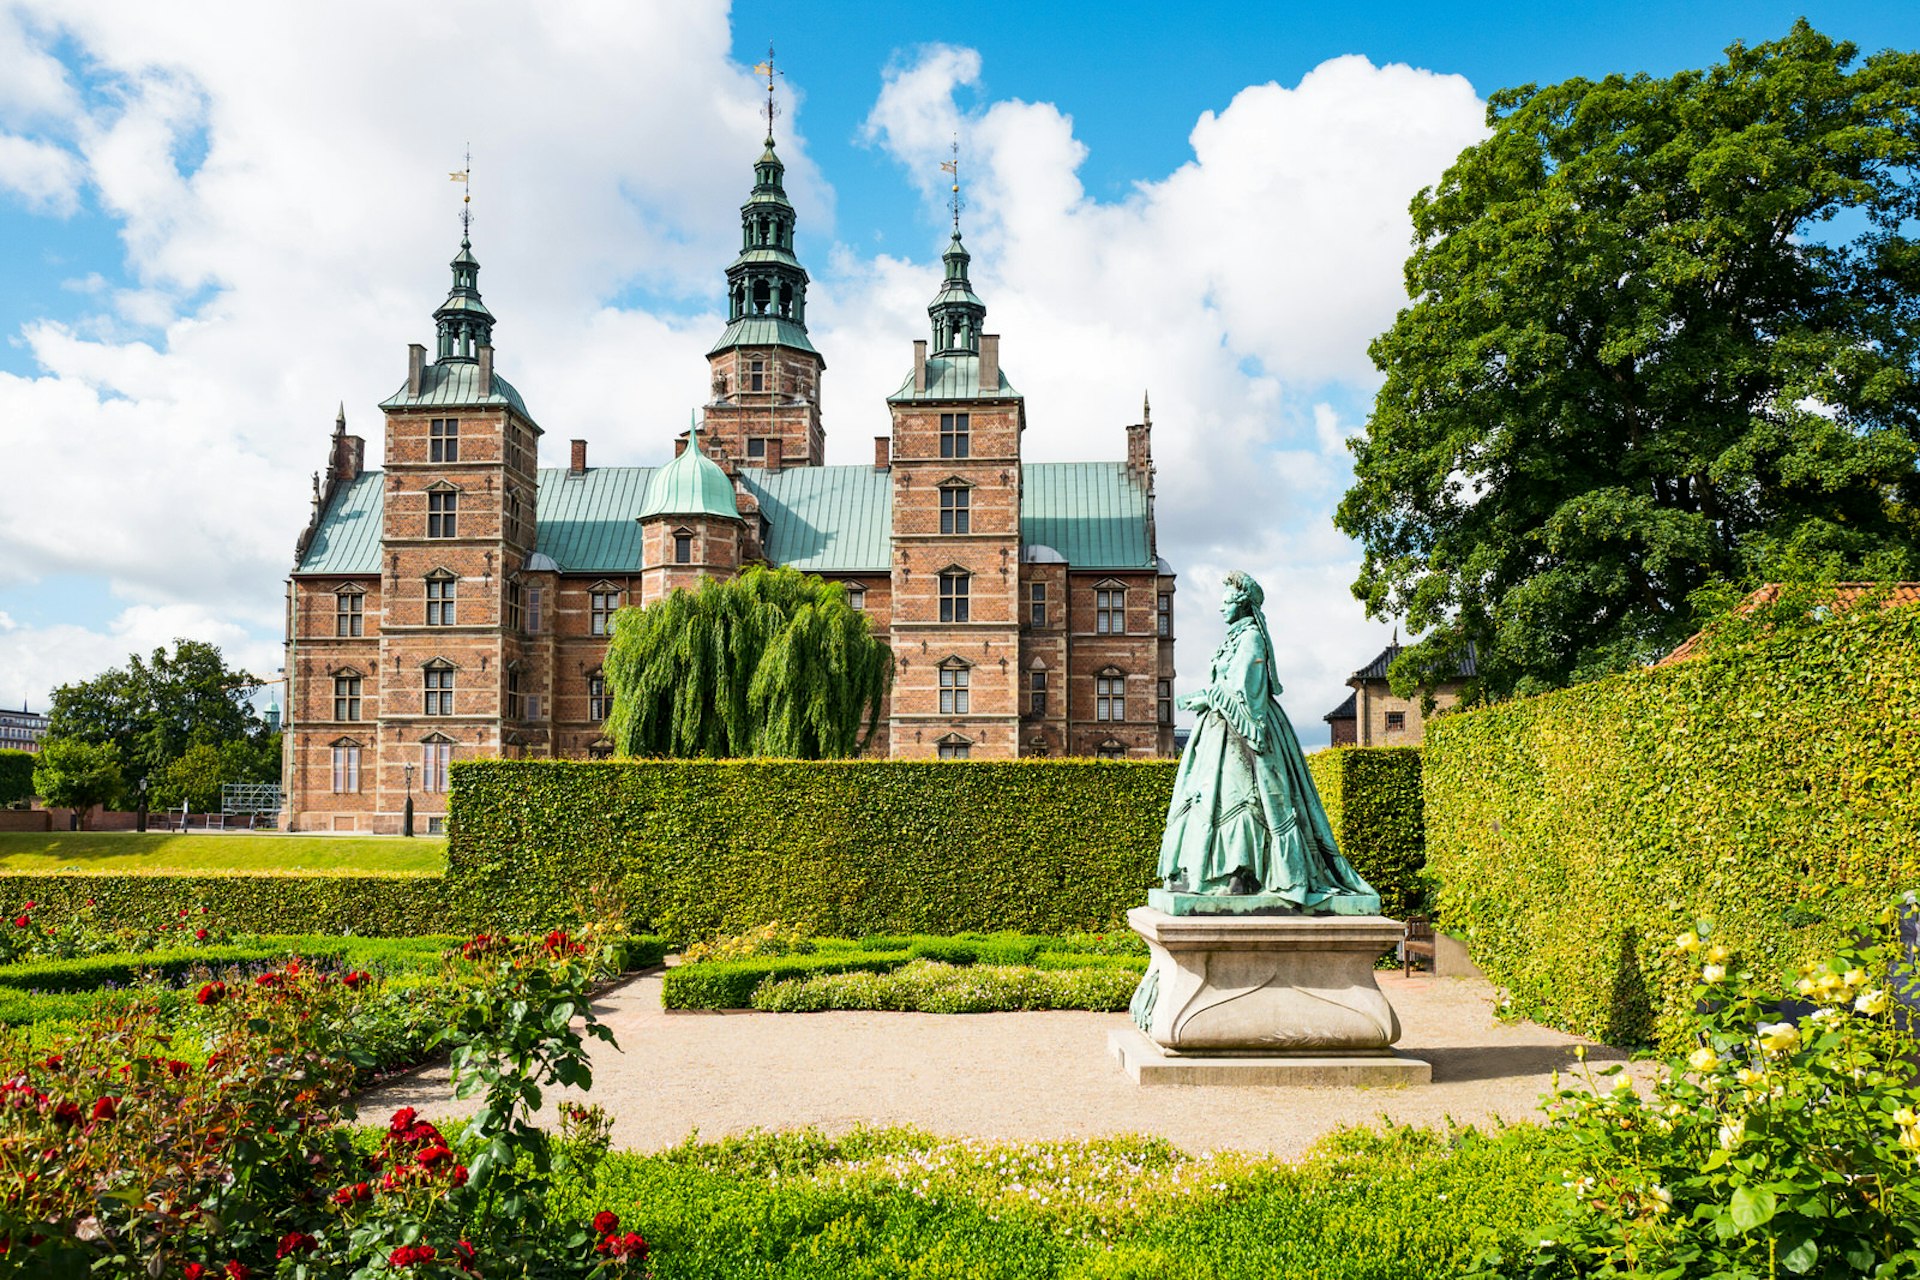 The Rosenborg castle seen from the King's garden with the statue of the Queen Caroline Amalie on the right © Gimas / Shutterstock